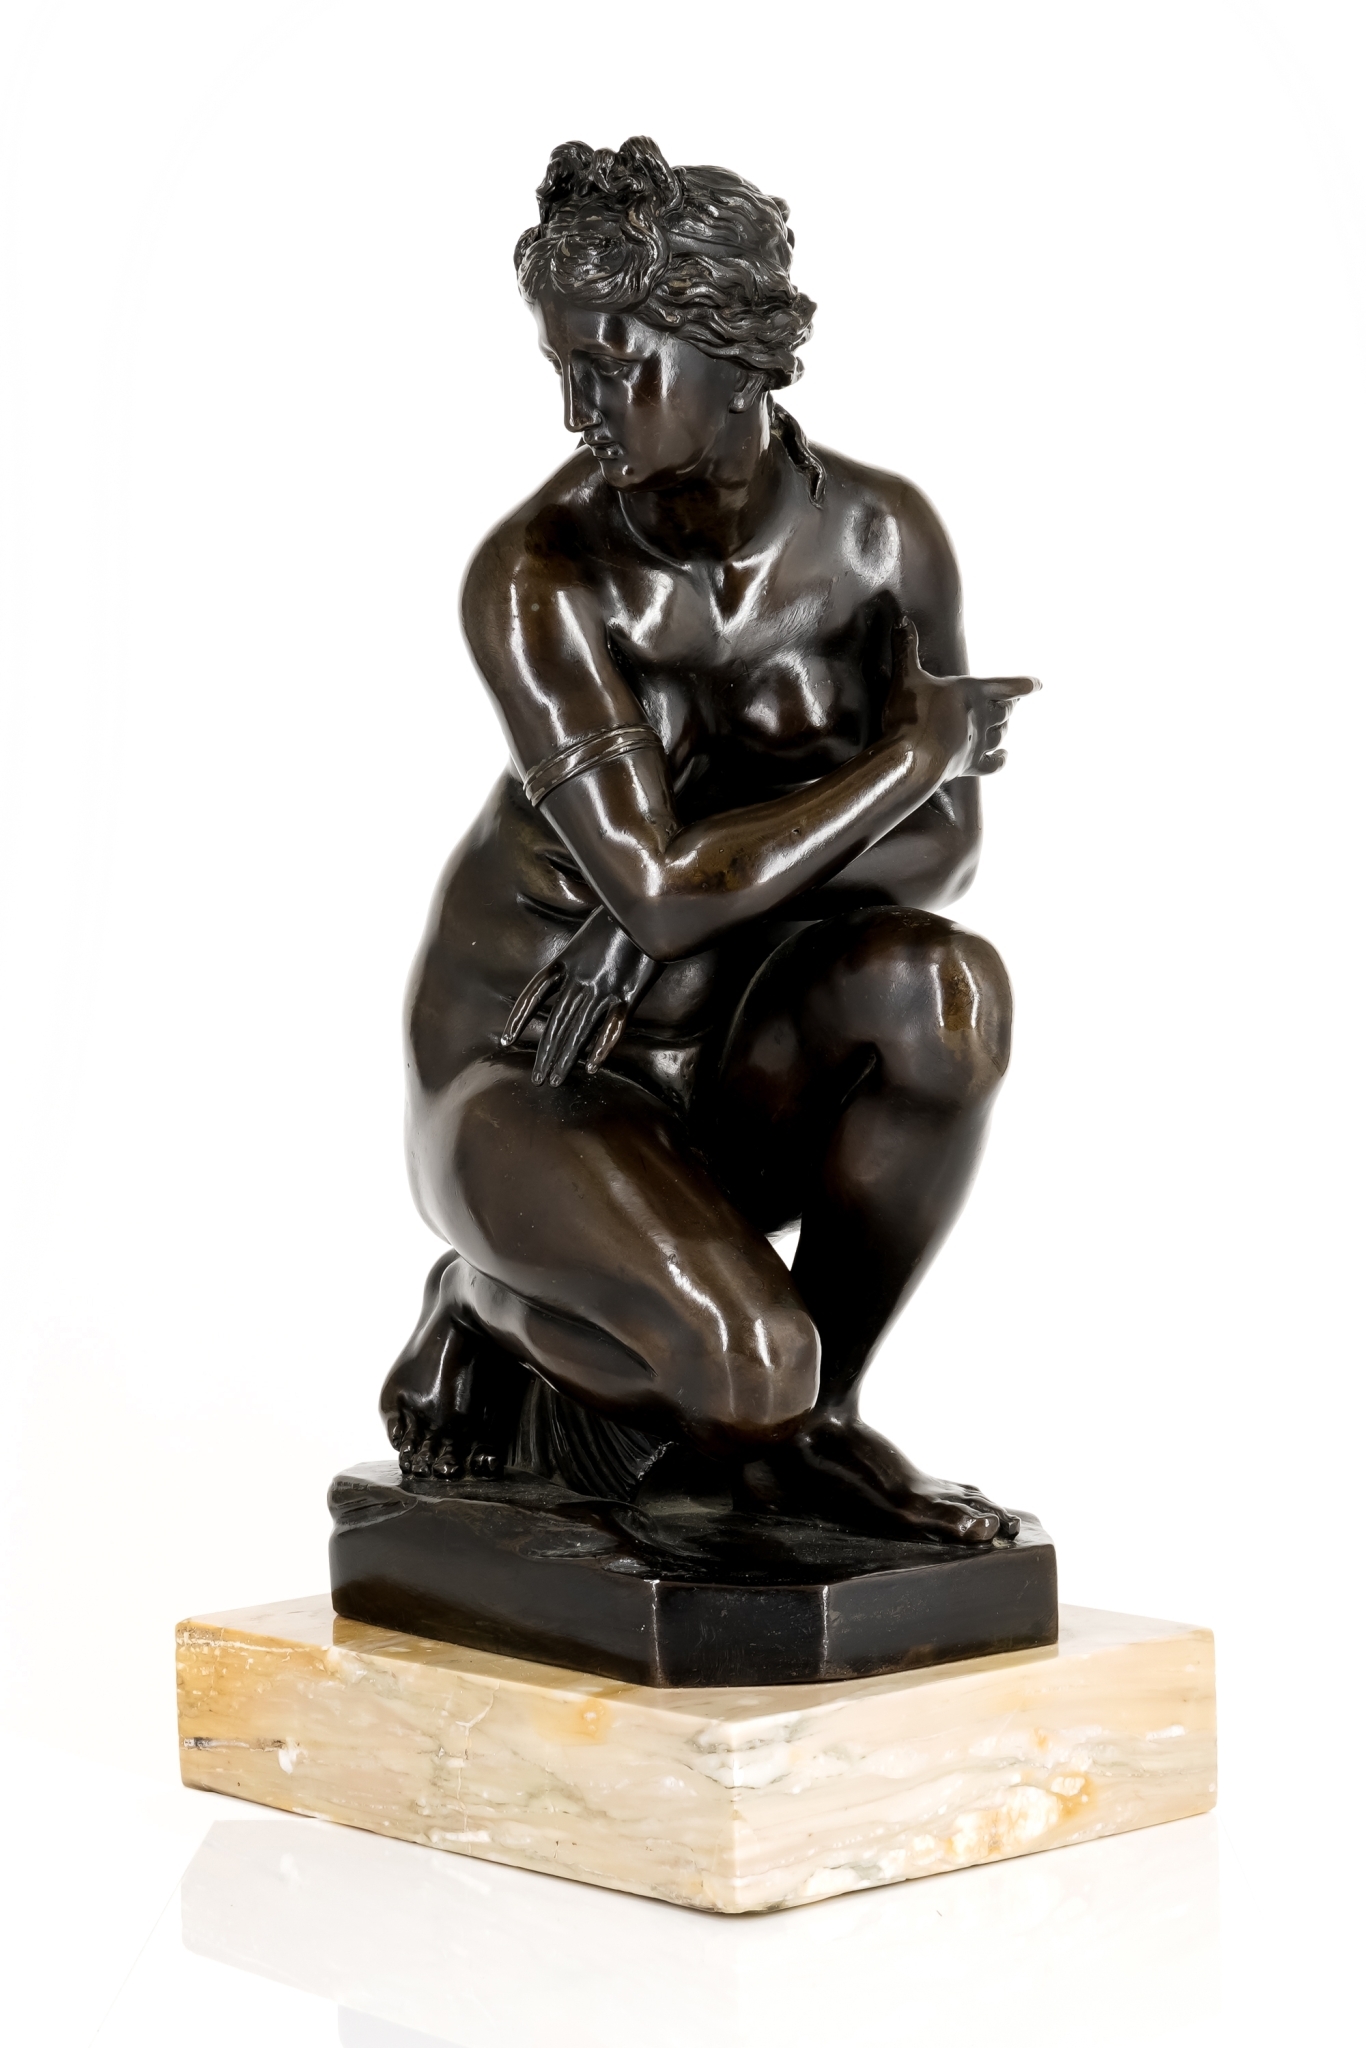 AFTER THE ANTIQUE: A BRONZE MODEL OF THE CROUCHING VENUS POSSIBLY FRENCH/ITALIAN, 18TH CENTURY  The bronze 30cm high (excluding pl £5000-8000